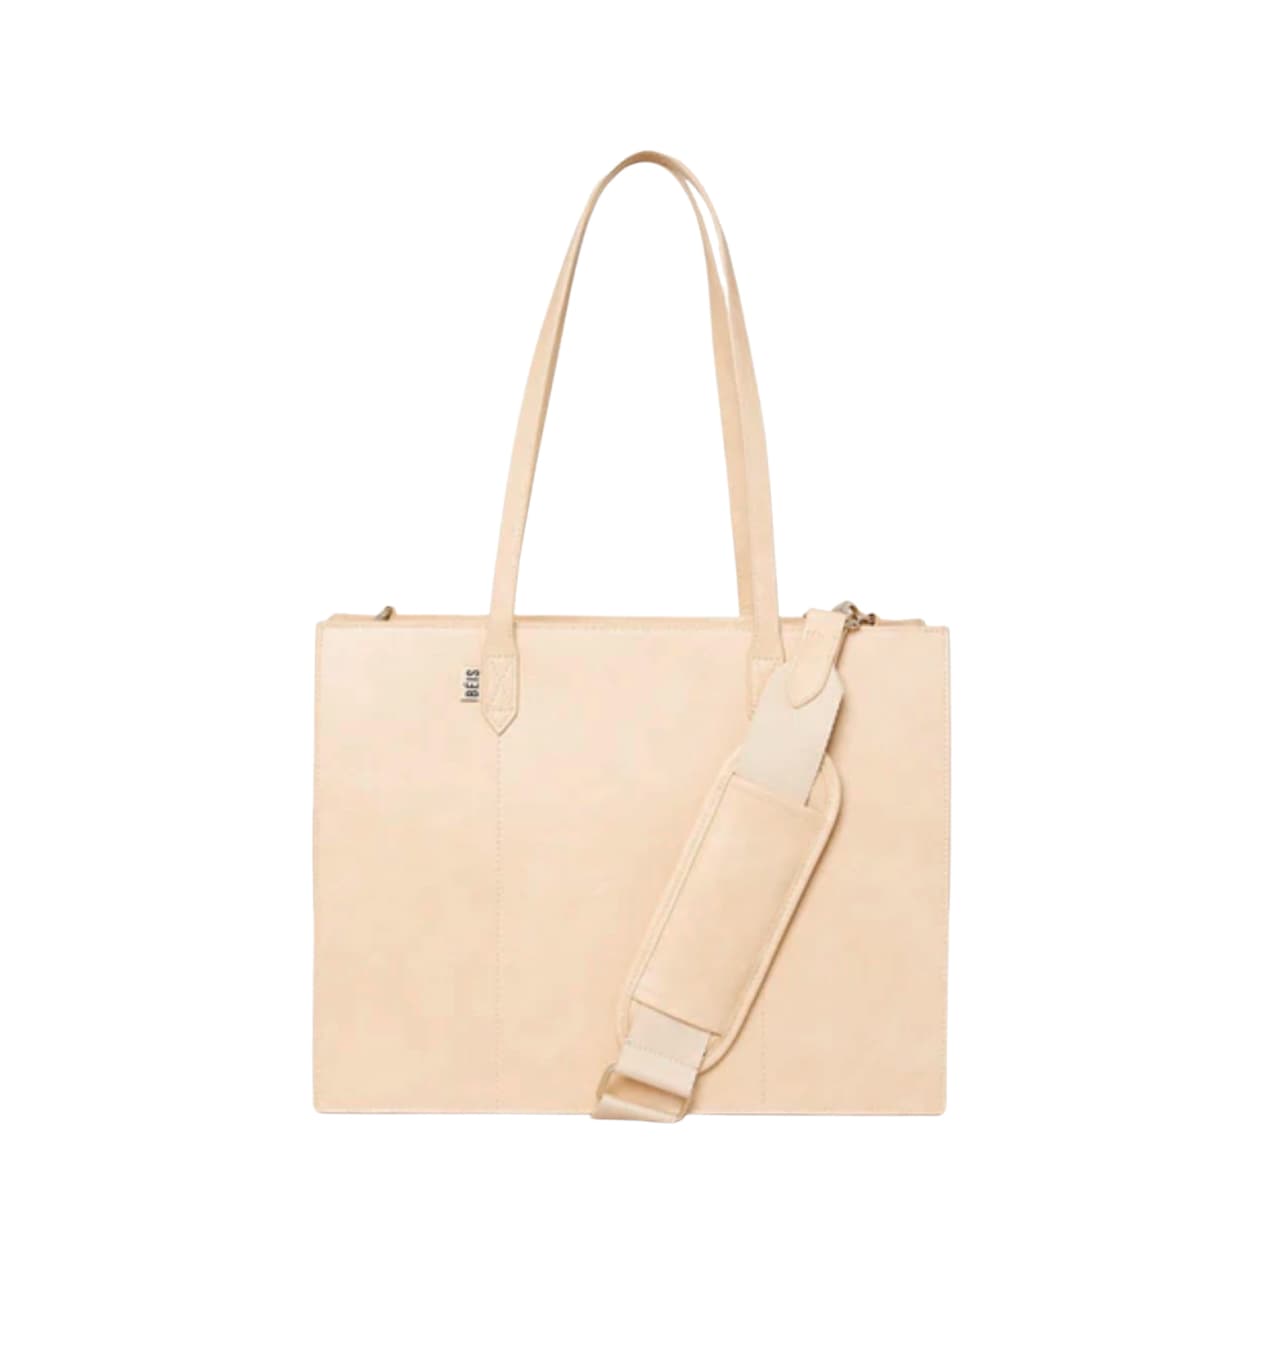 Tote Bags - Tote Bags for Work & Travel